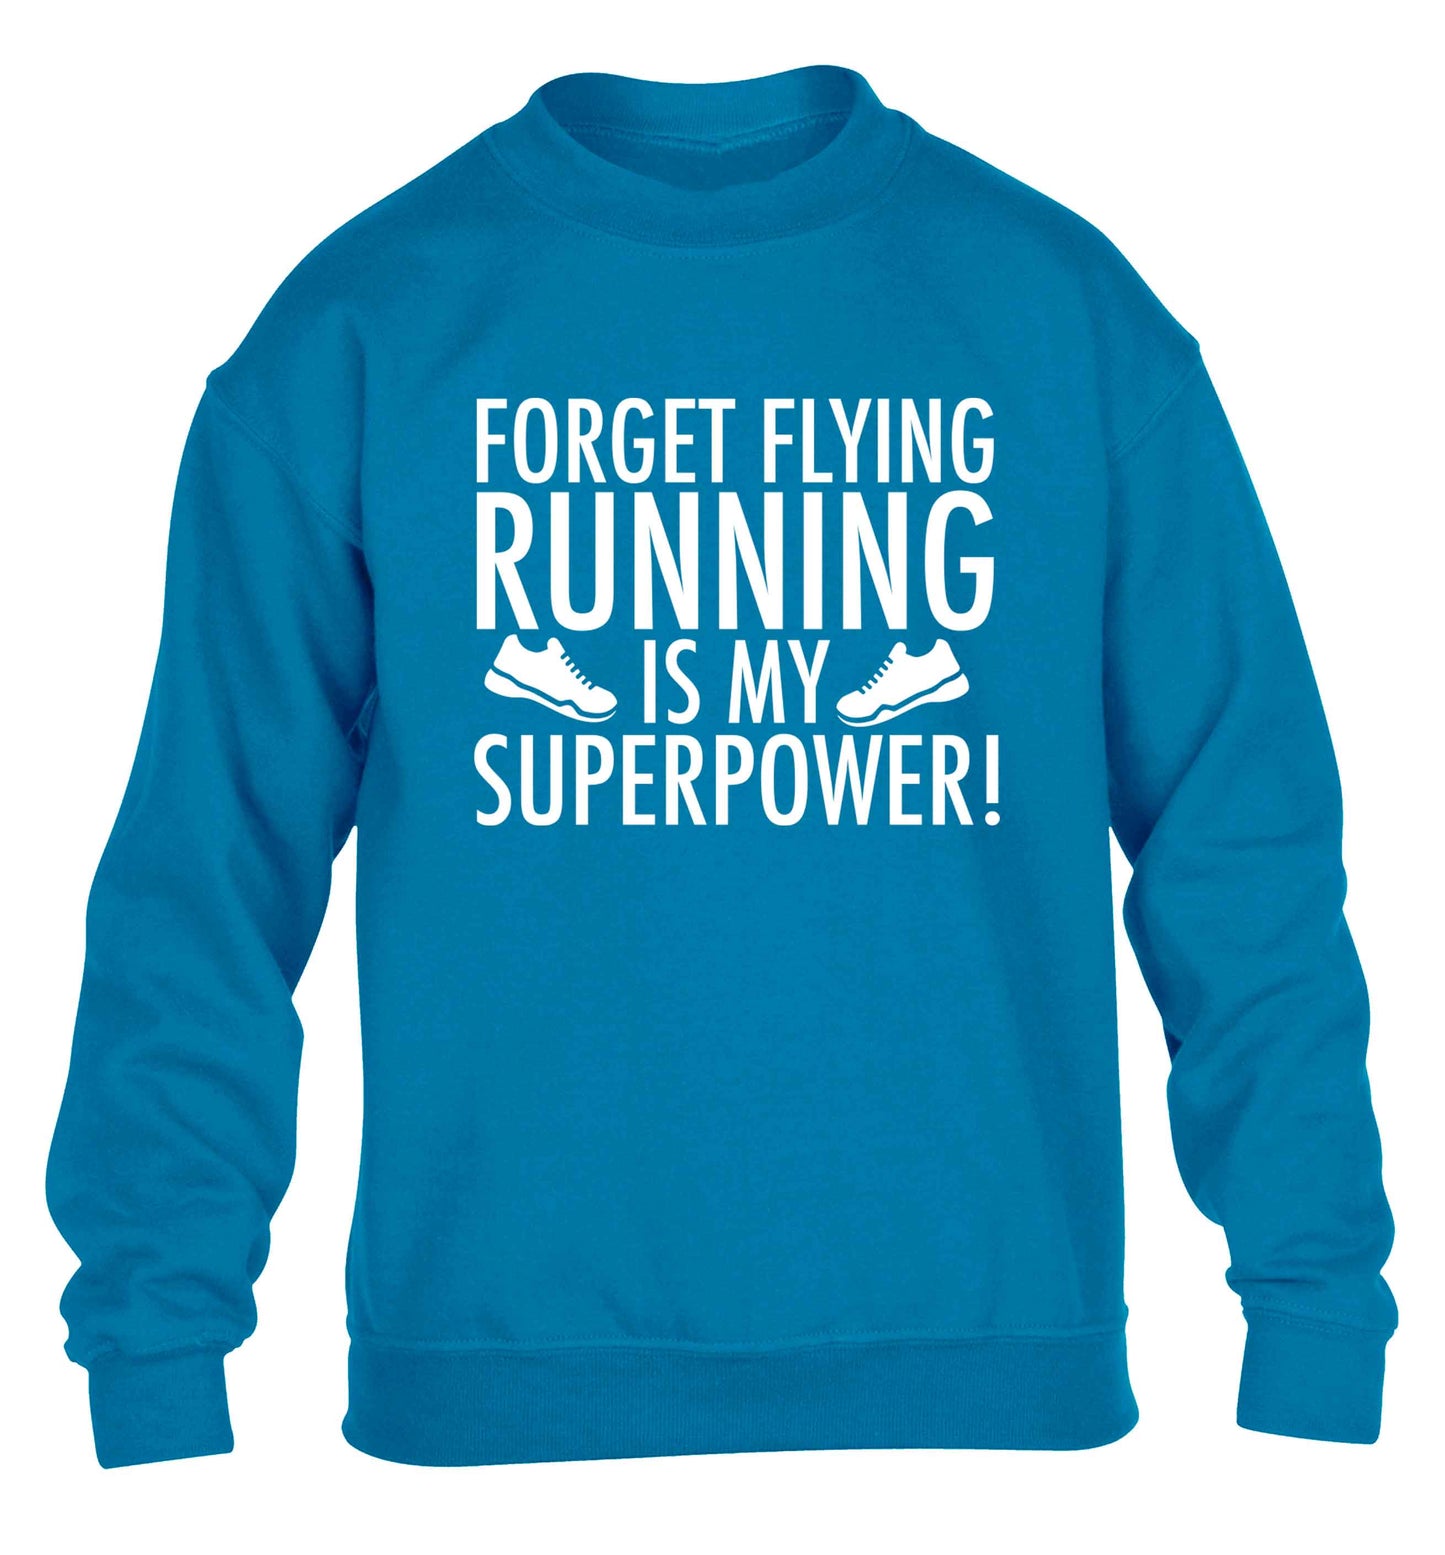 Forget flying running is my superpower children's blue sweater 12-13 Years